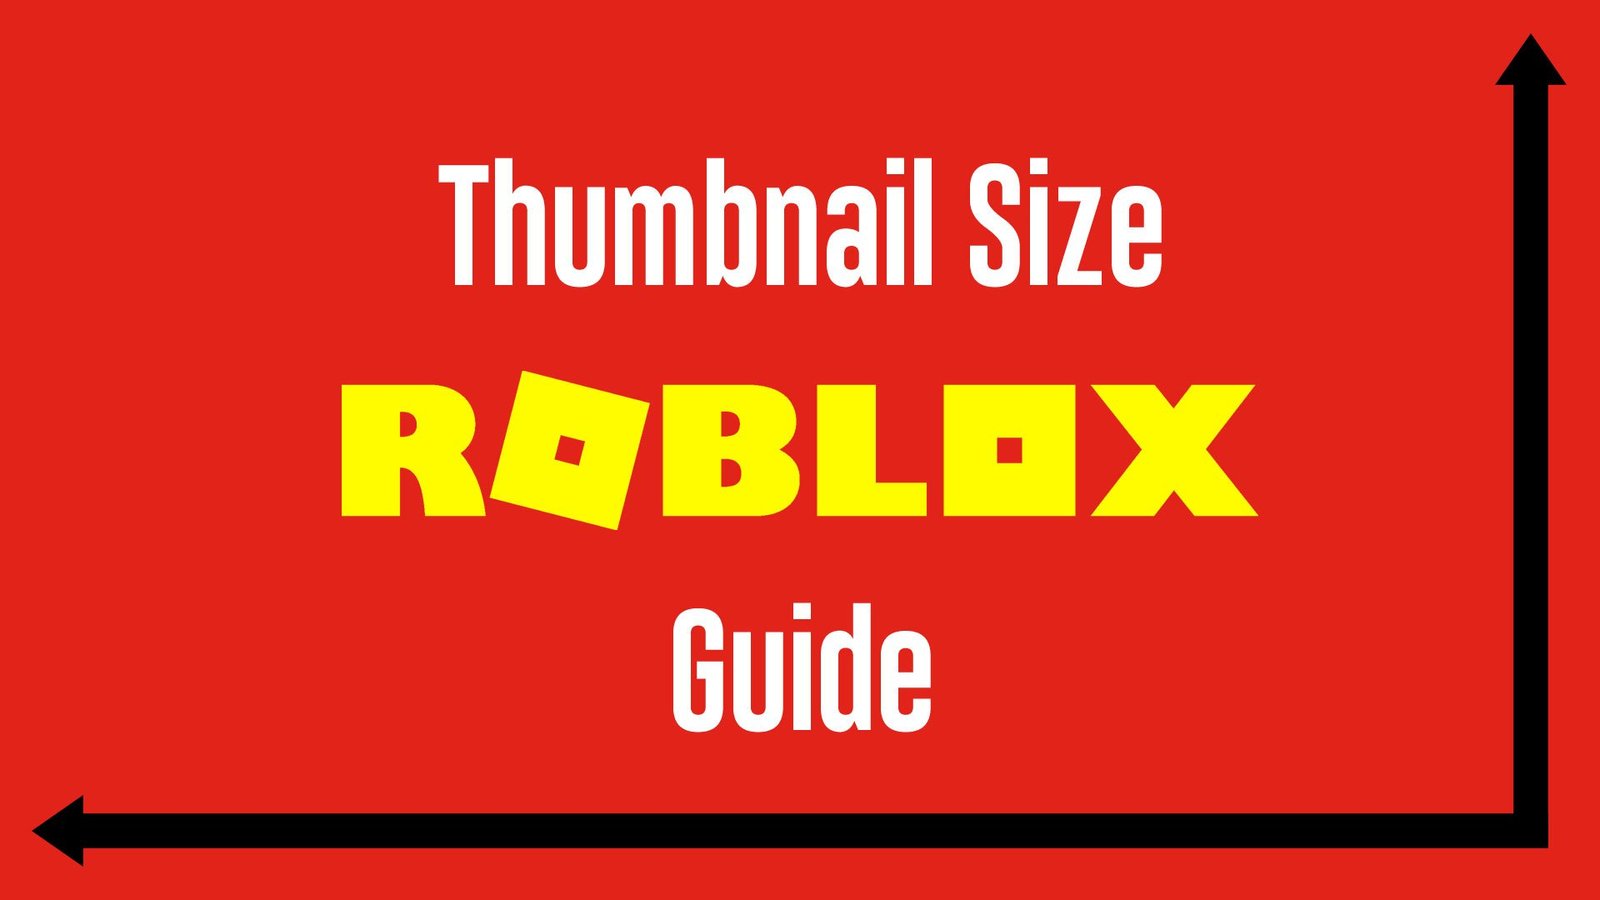 Everything You Need To Know About Roblox Thumbnail Size - roblox game thumbnail size 2020